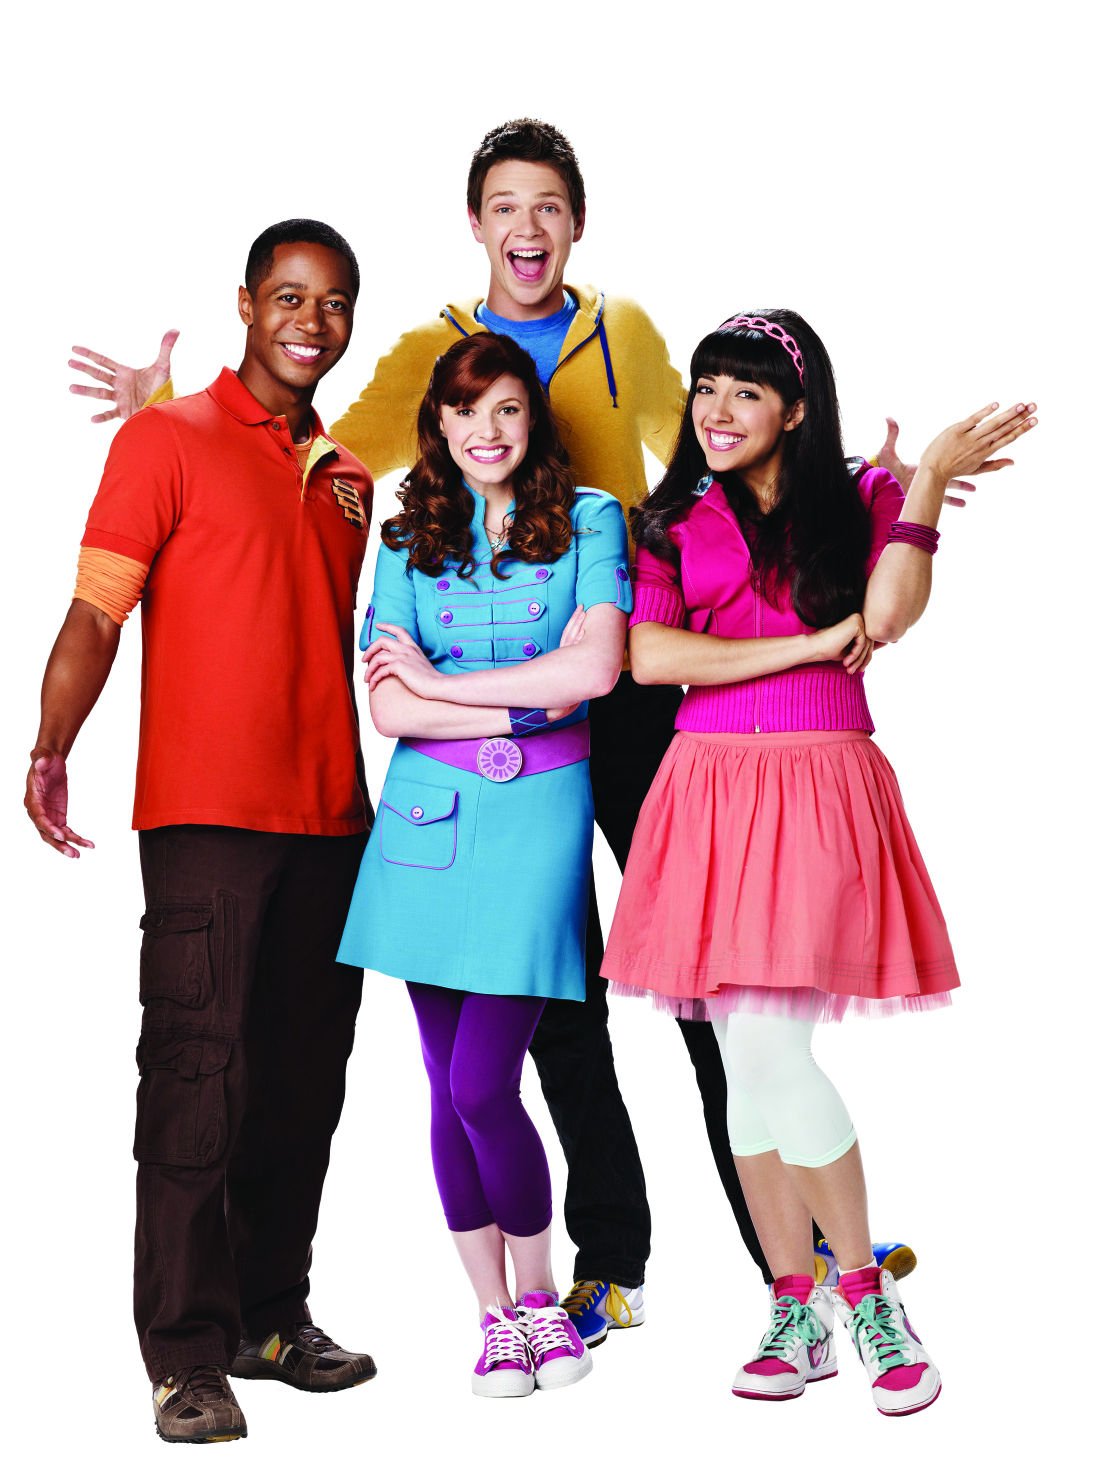 Nickelodeon’s ‘The Fresh Beat Band’ comes to Pittsburgh in December